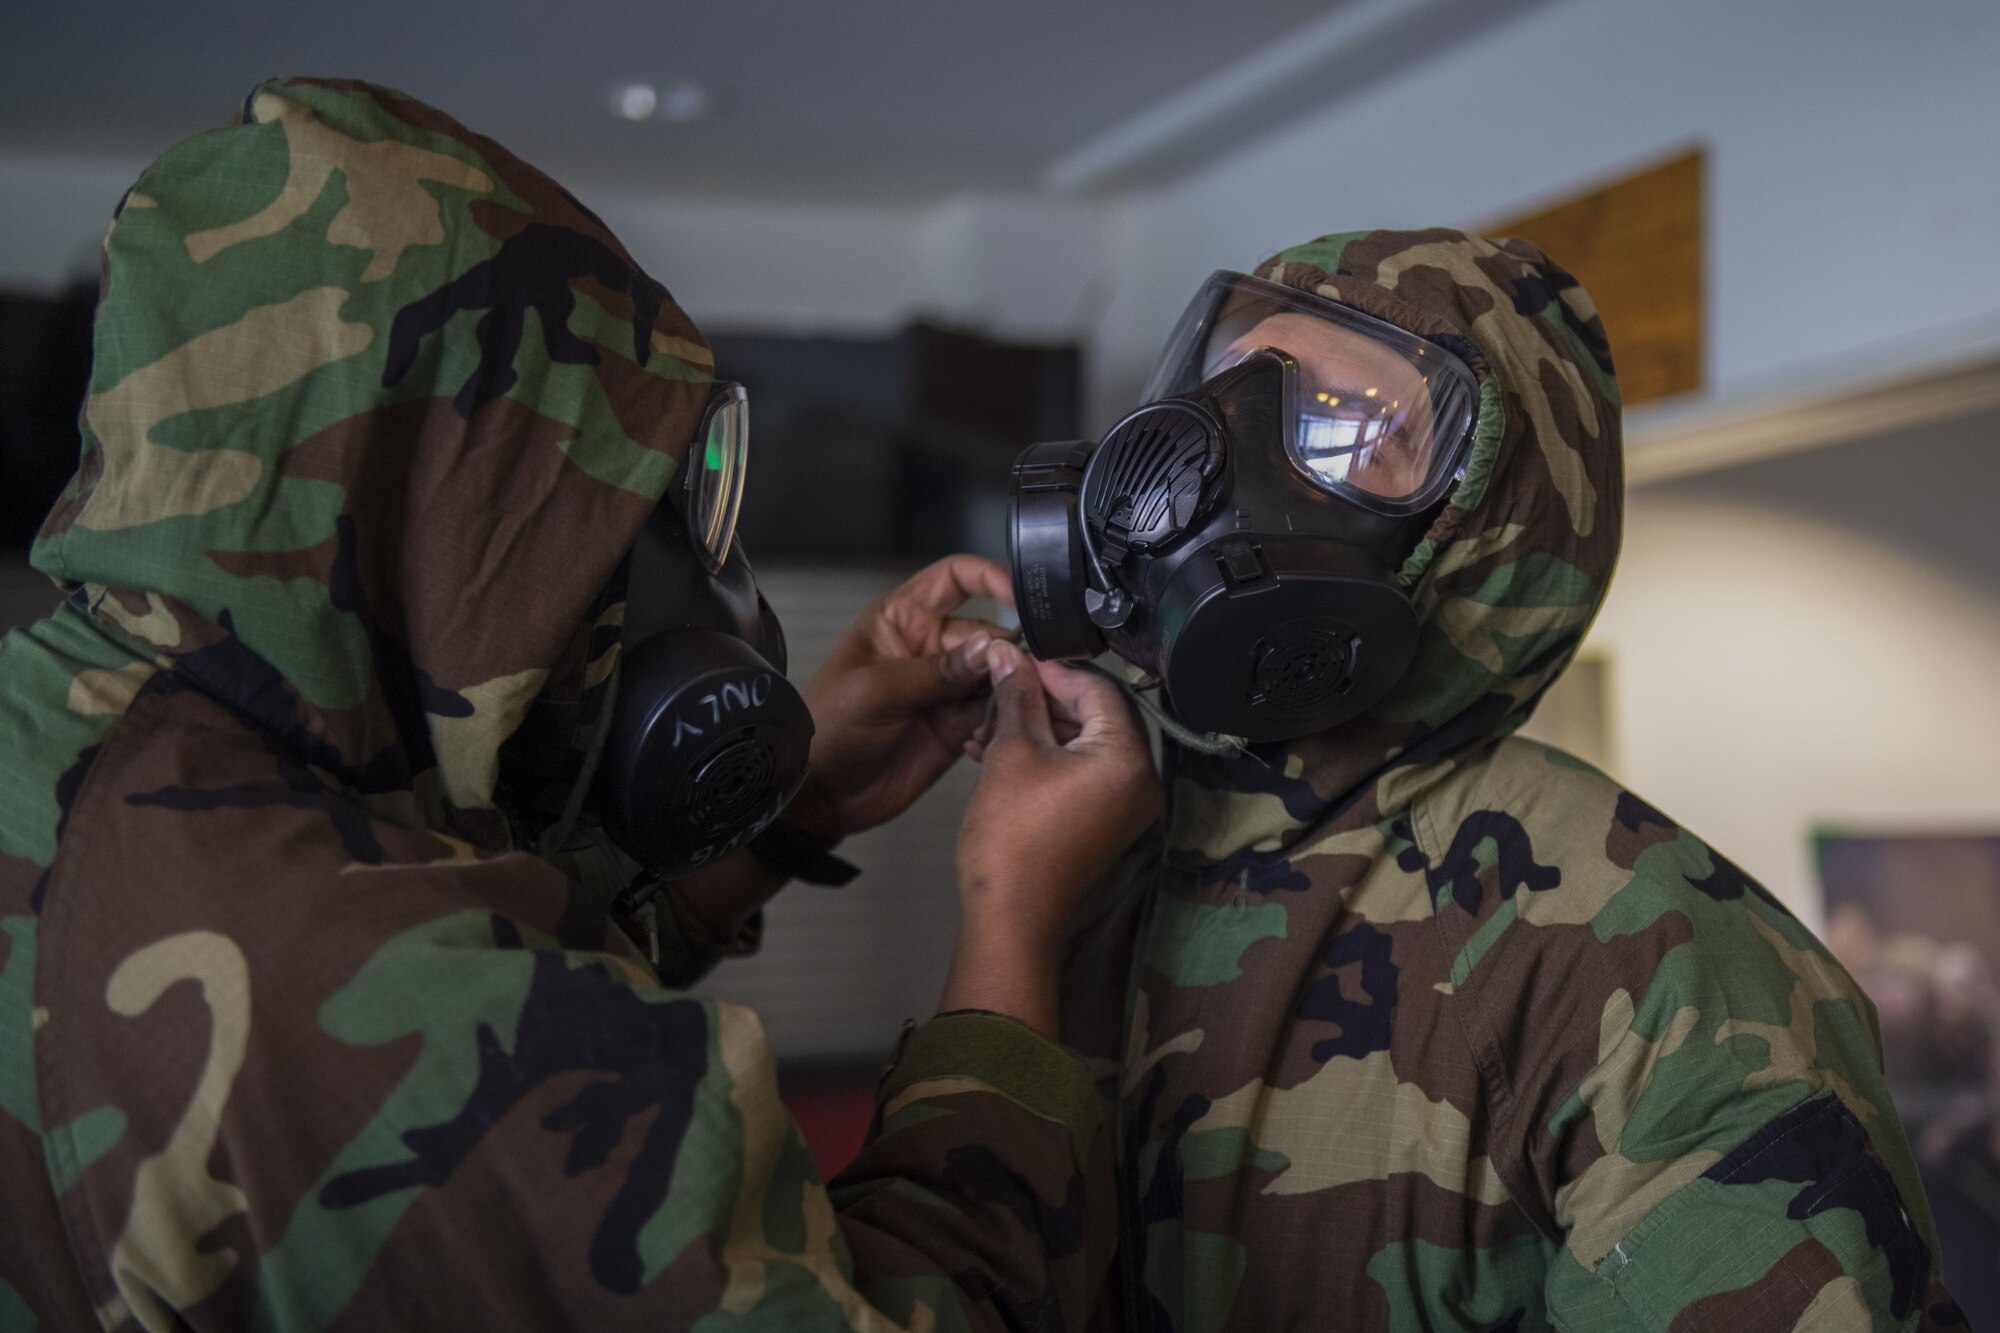 Two U.S. Air Force Airmen from the 702nd Munitions Support Squadron perform a buddy check on one another during chemical, biological, radiological and nuclear training at the 702nd MUNSS, April 13, 2021. Buddy checks are performed while Airmen are in full Mission Oriented Protective Posture gear to ensure there are no potential leaks in the MOPP suit or gas mask. (U.S. Air Force photo by Senior Airman Ali Stewart)